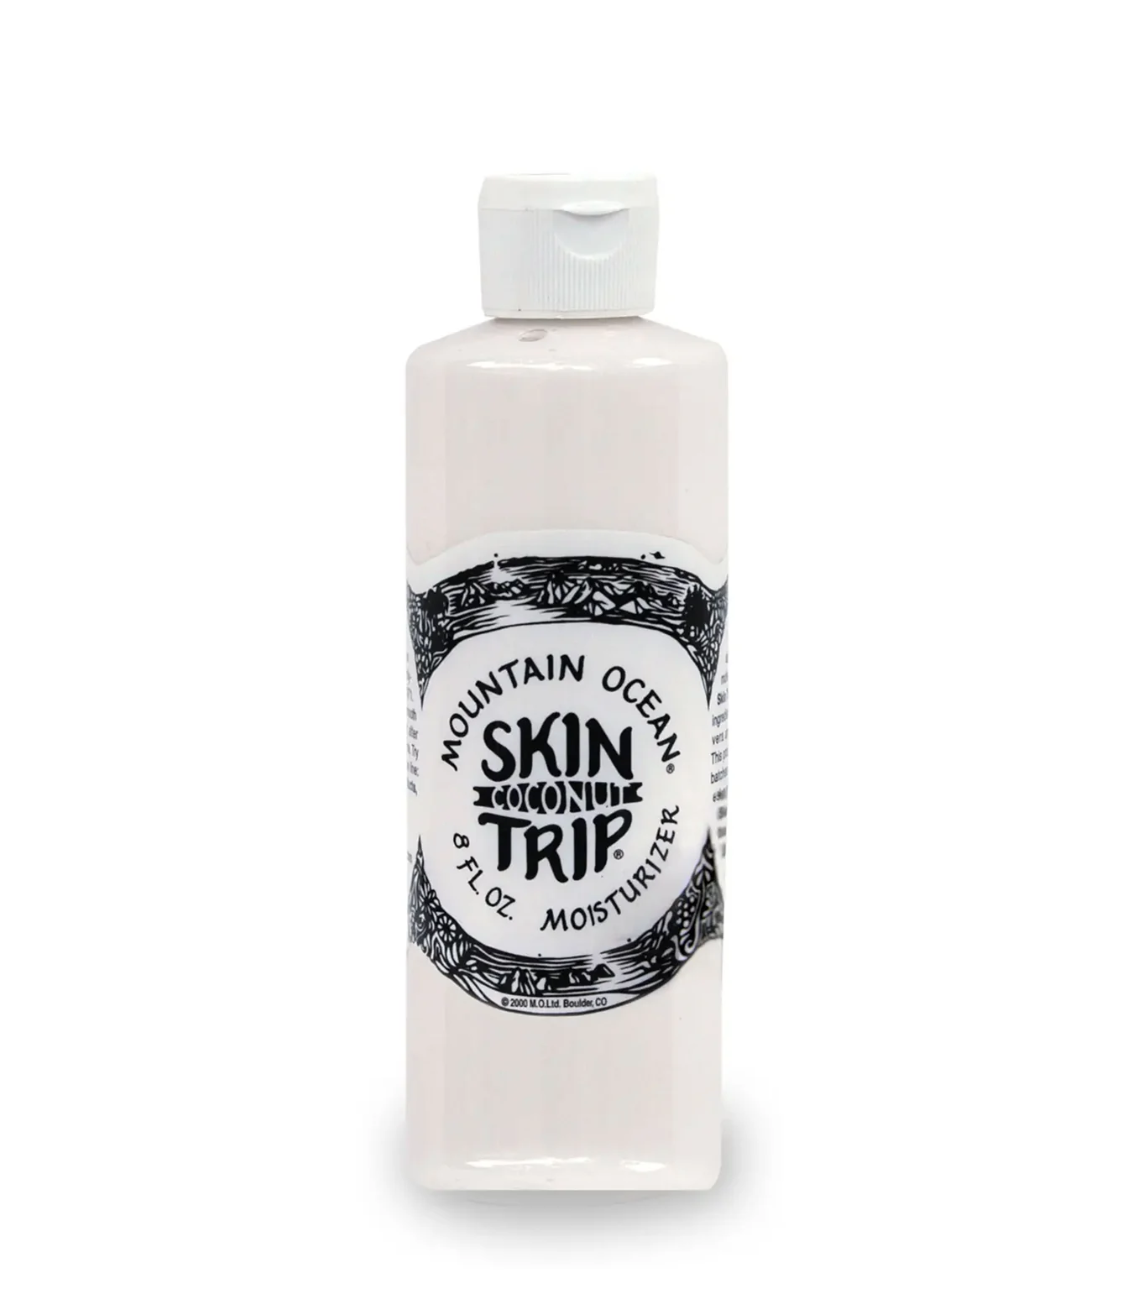 A bottle of Faire Skin Trip Lotion 8oz, displayed upright on a white bungalow-themed background. The product label features decorative black text and patterns.